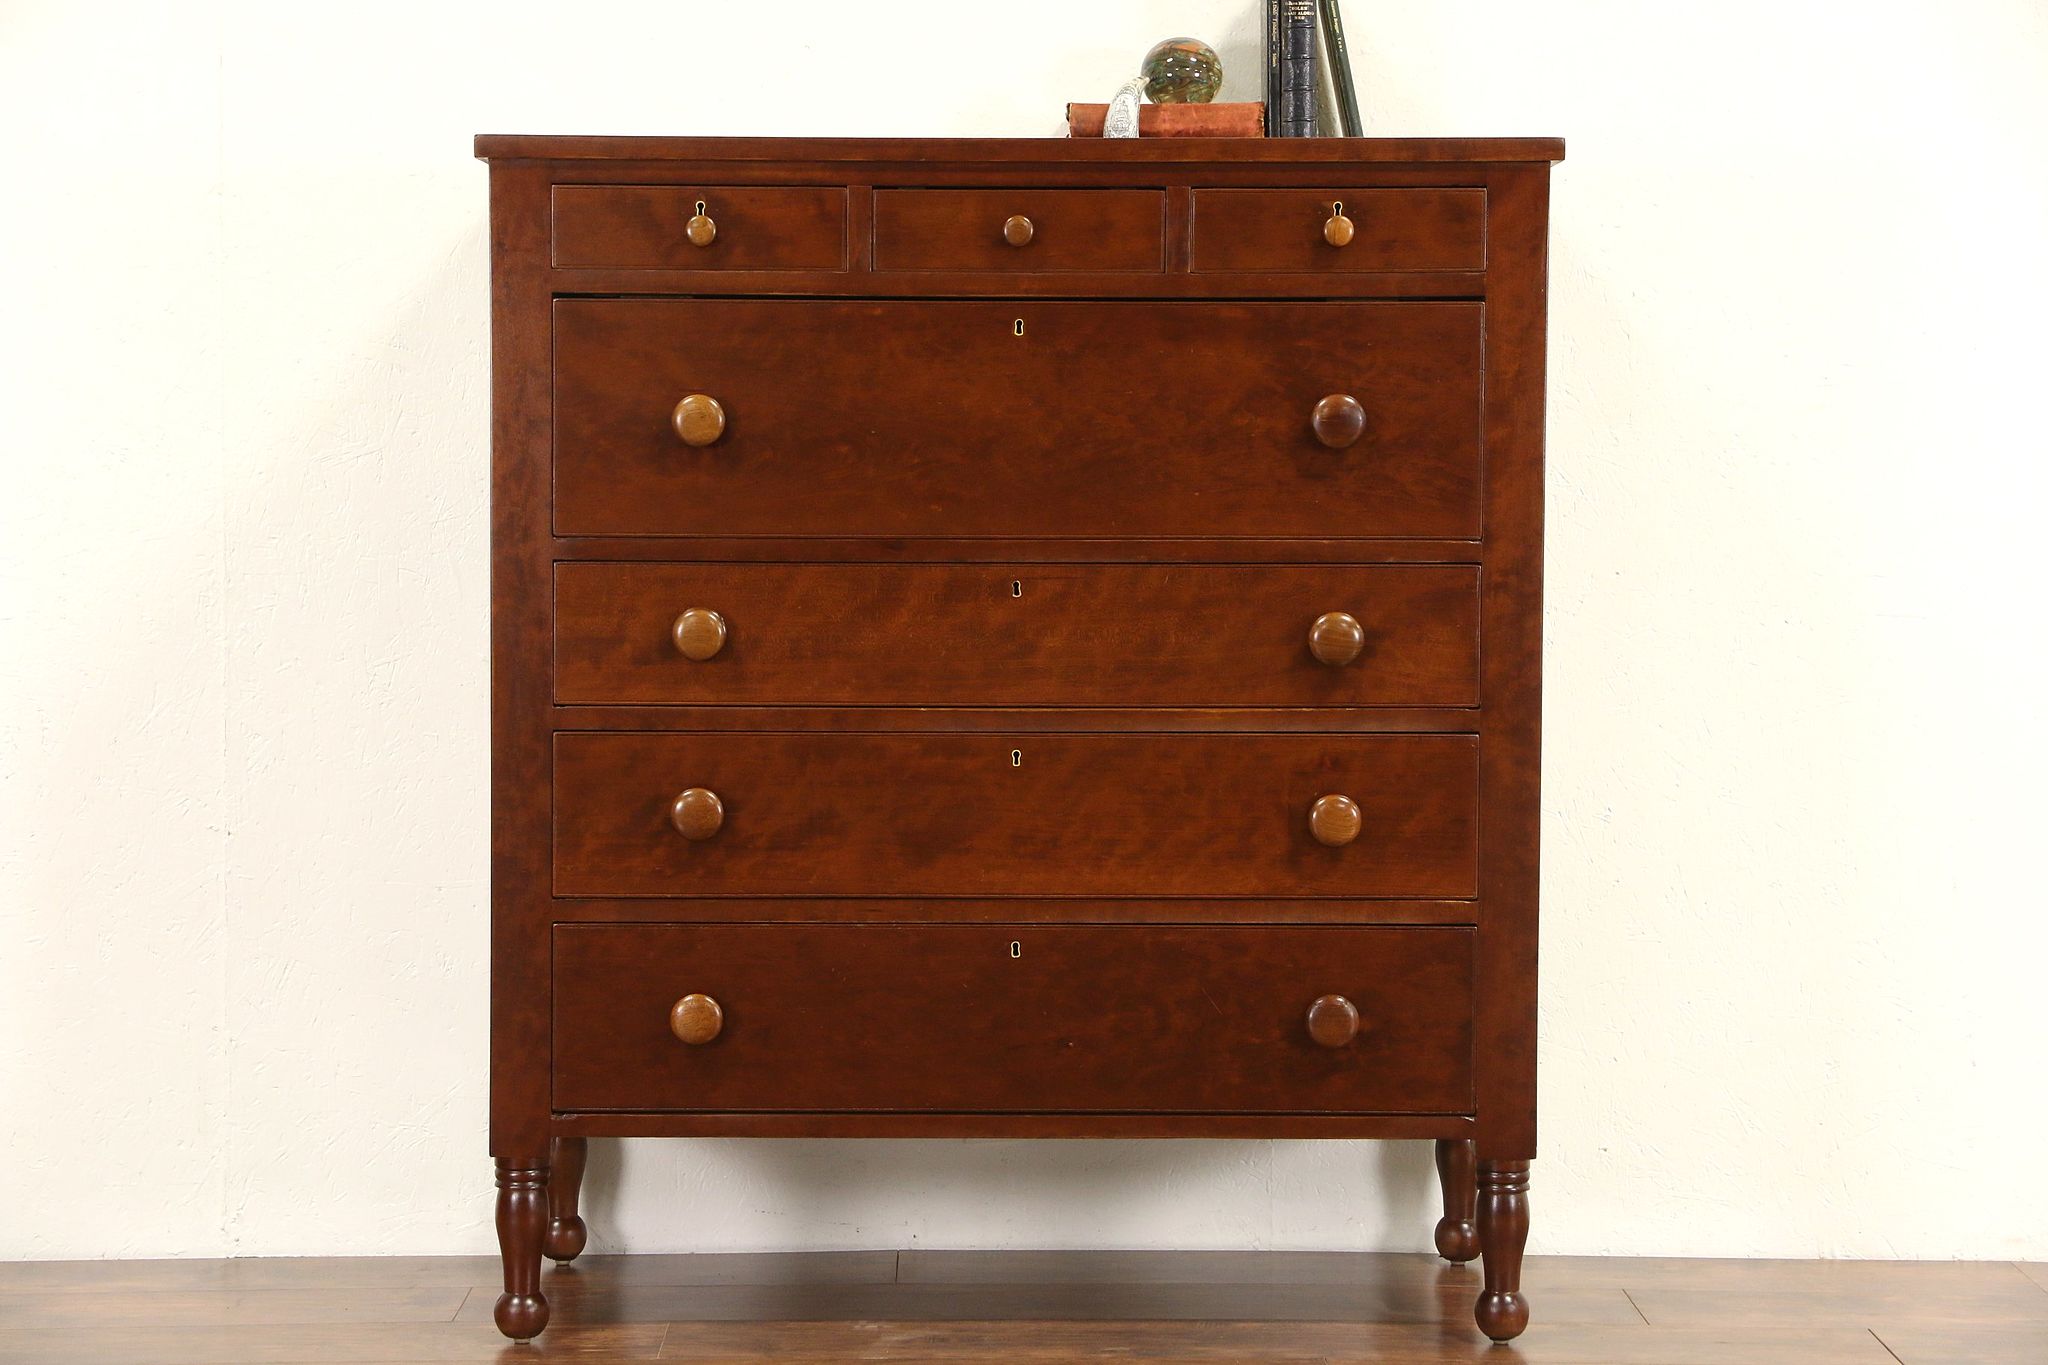 Sold Empire Cherry 1830 Antique Chest Of Drawers Or Tall Dresser